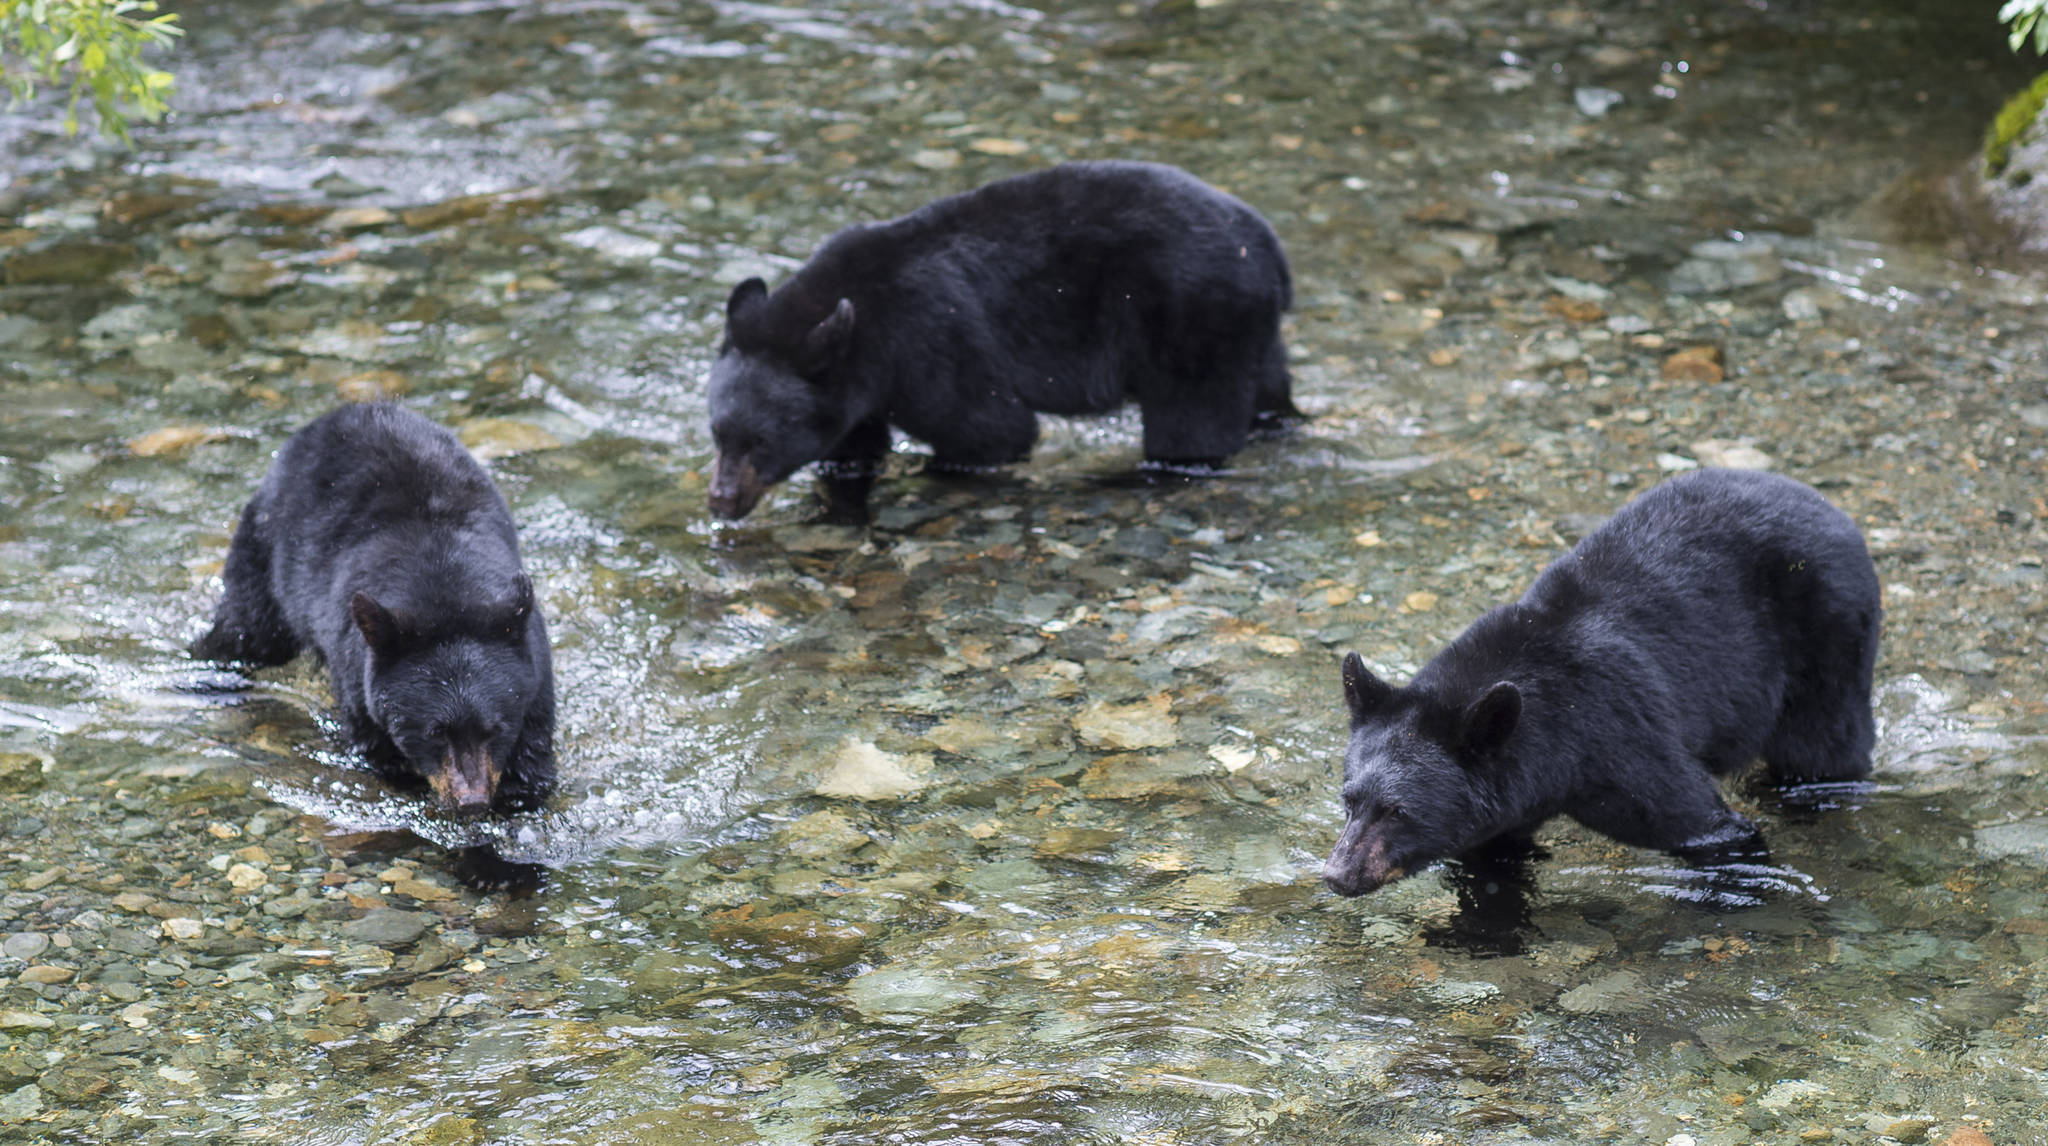 Michael Penn | Juneau Empire File                                Three 2-year-old black bear cubs hunt spawning sockeye salmon in Steep Creek at the Mendenhall Glacier Visitor Center in August 2018.